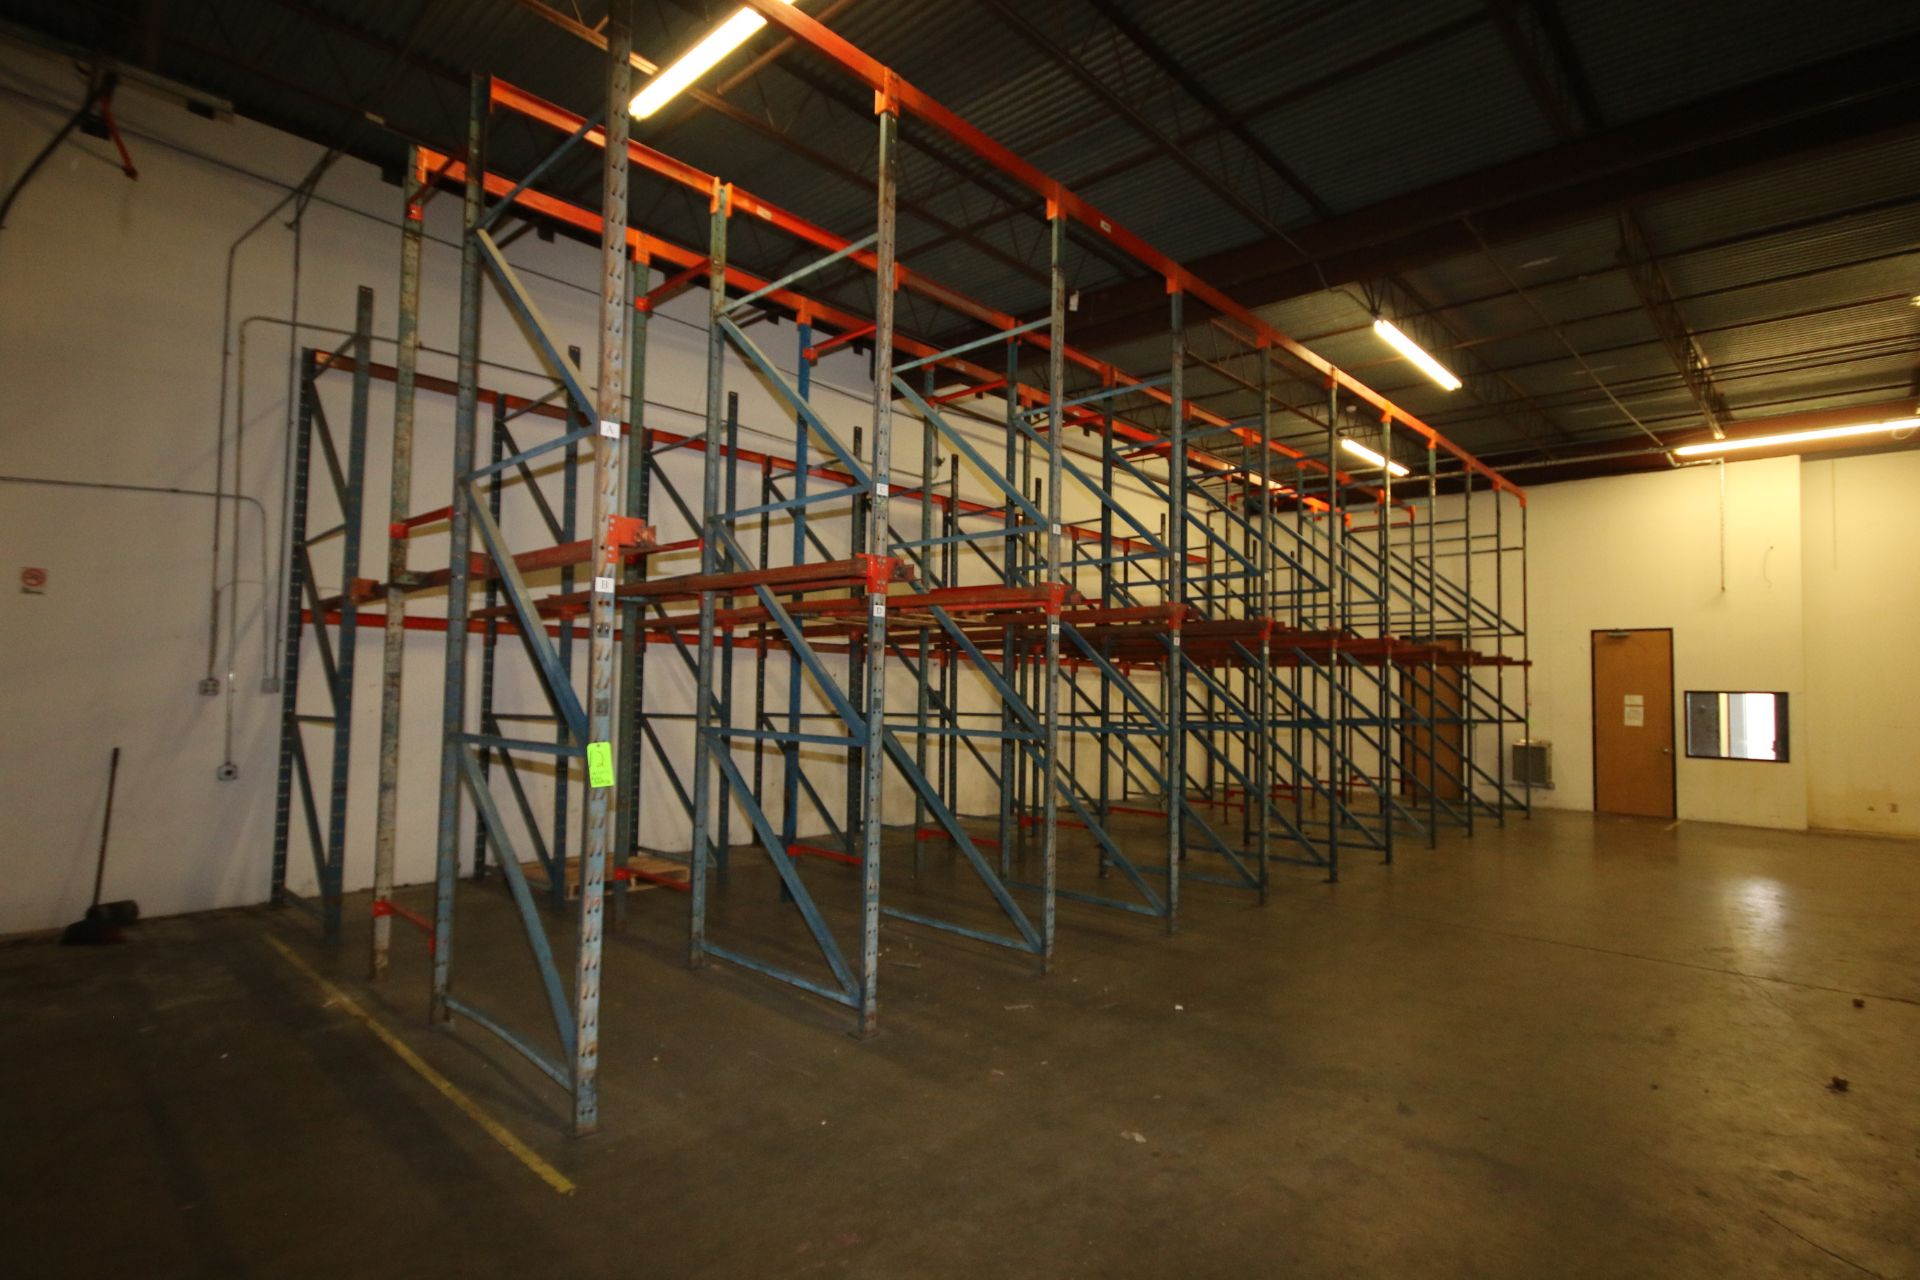 10-Sections of Pallet Racking, with 14' Uprights and Bolted Cross Beams, Overall Dims.: Aprox. 44' L - Image 2 of 3